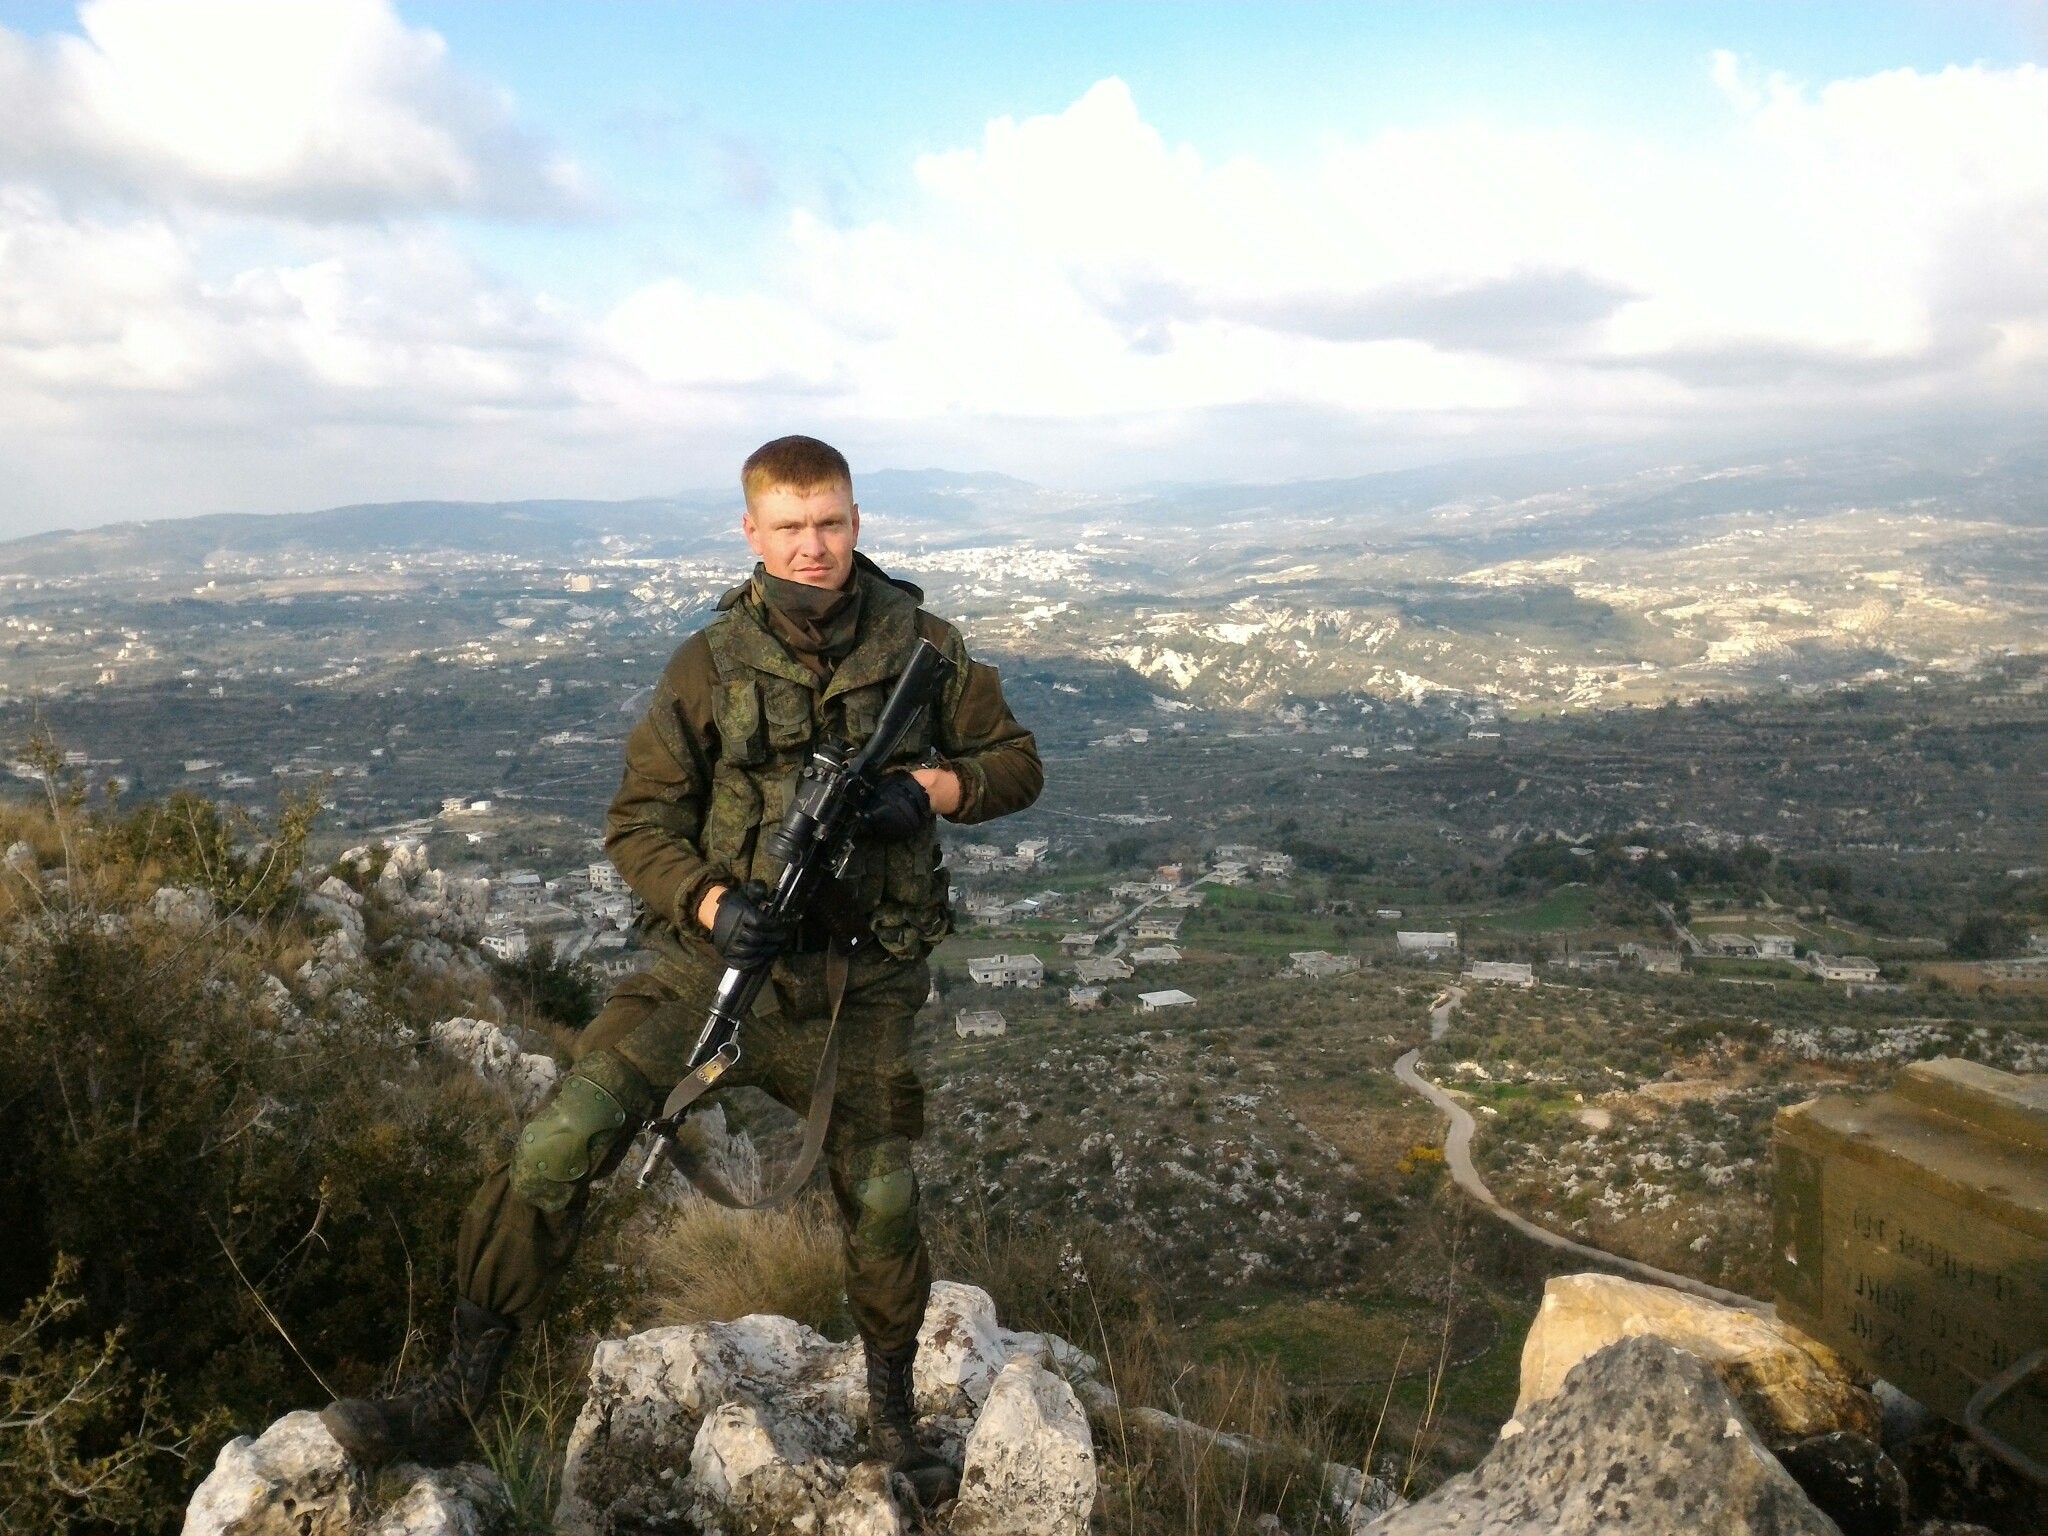 2048x1536 Russian marine in Latakia Governorate Syria wallpaper/ background for iPad  mini/ air/ 2 / pro/ laptop